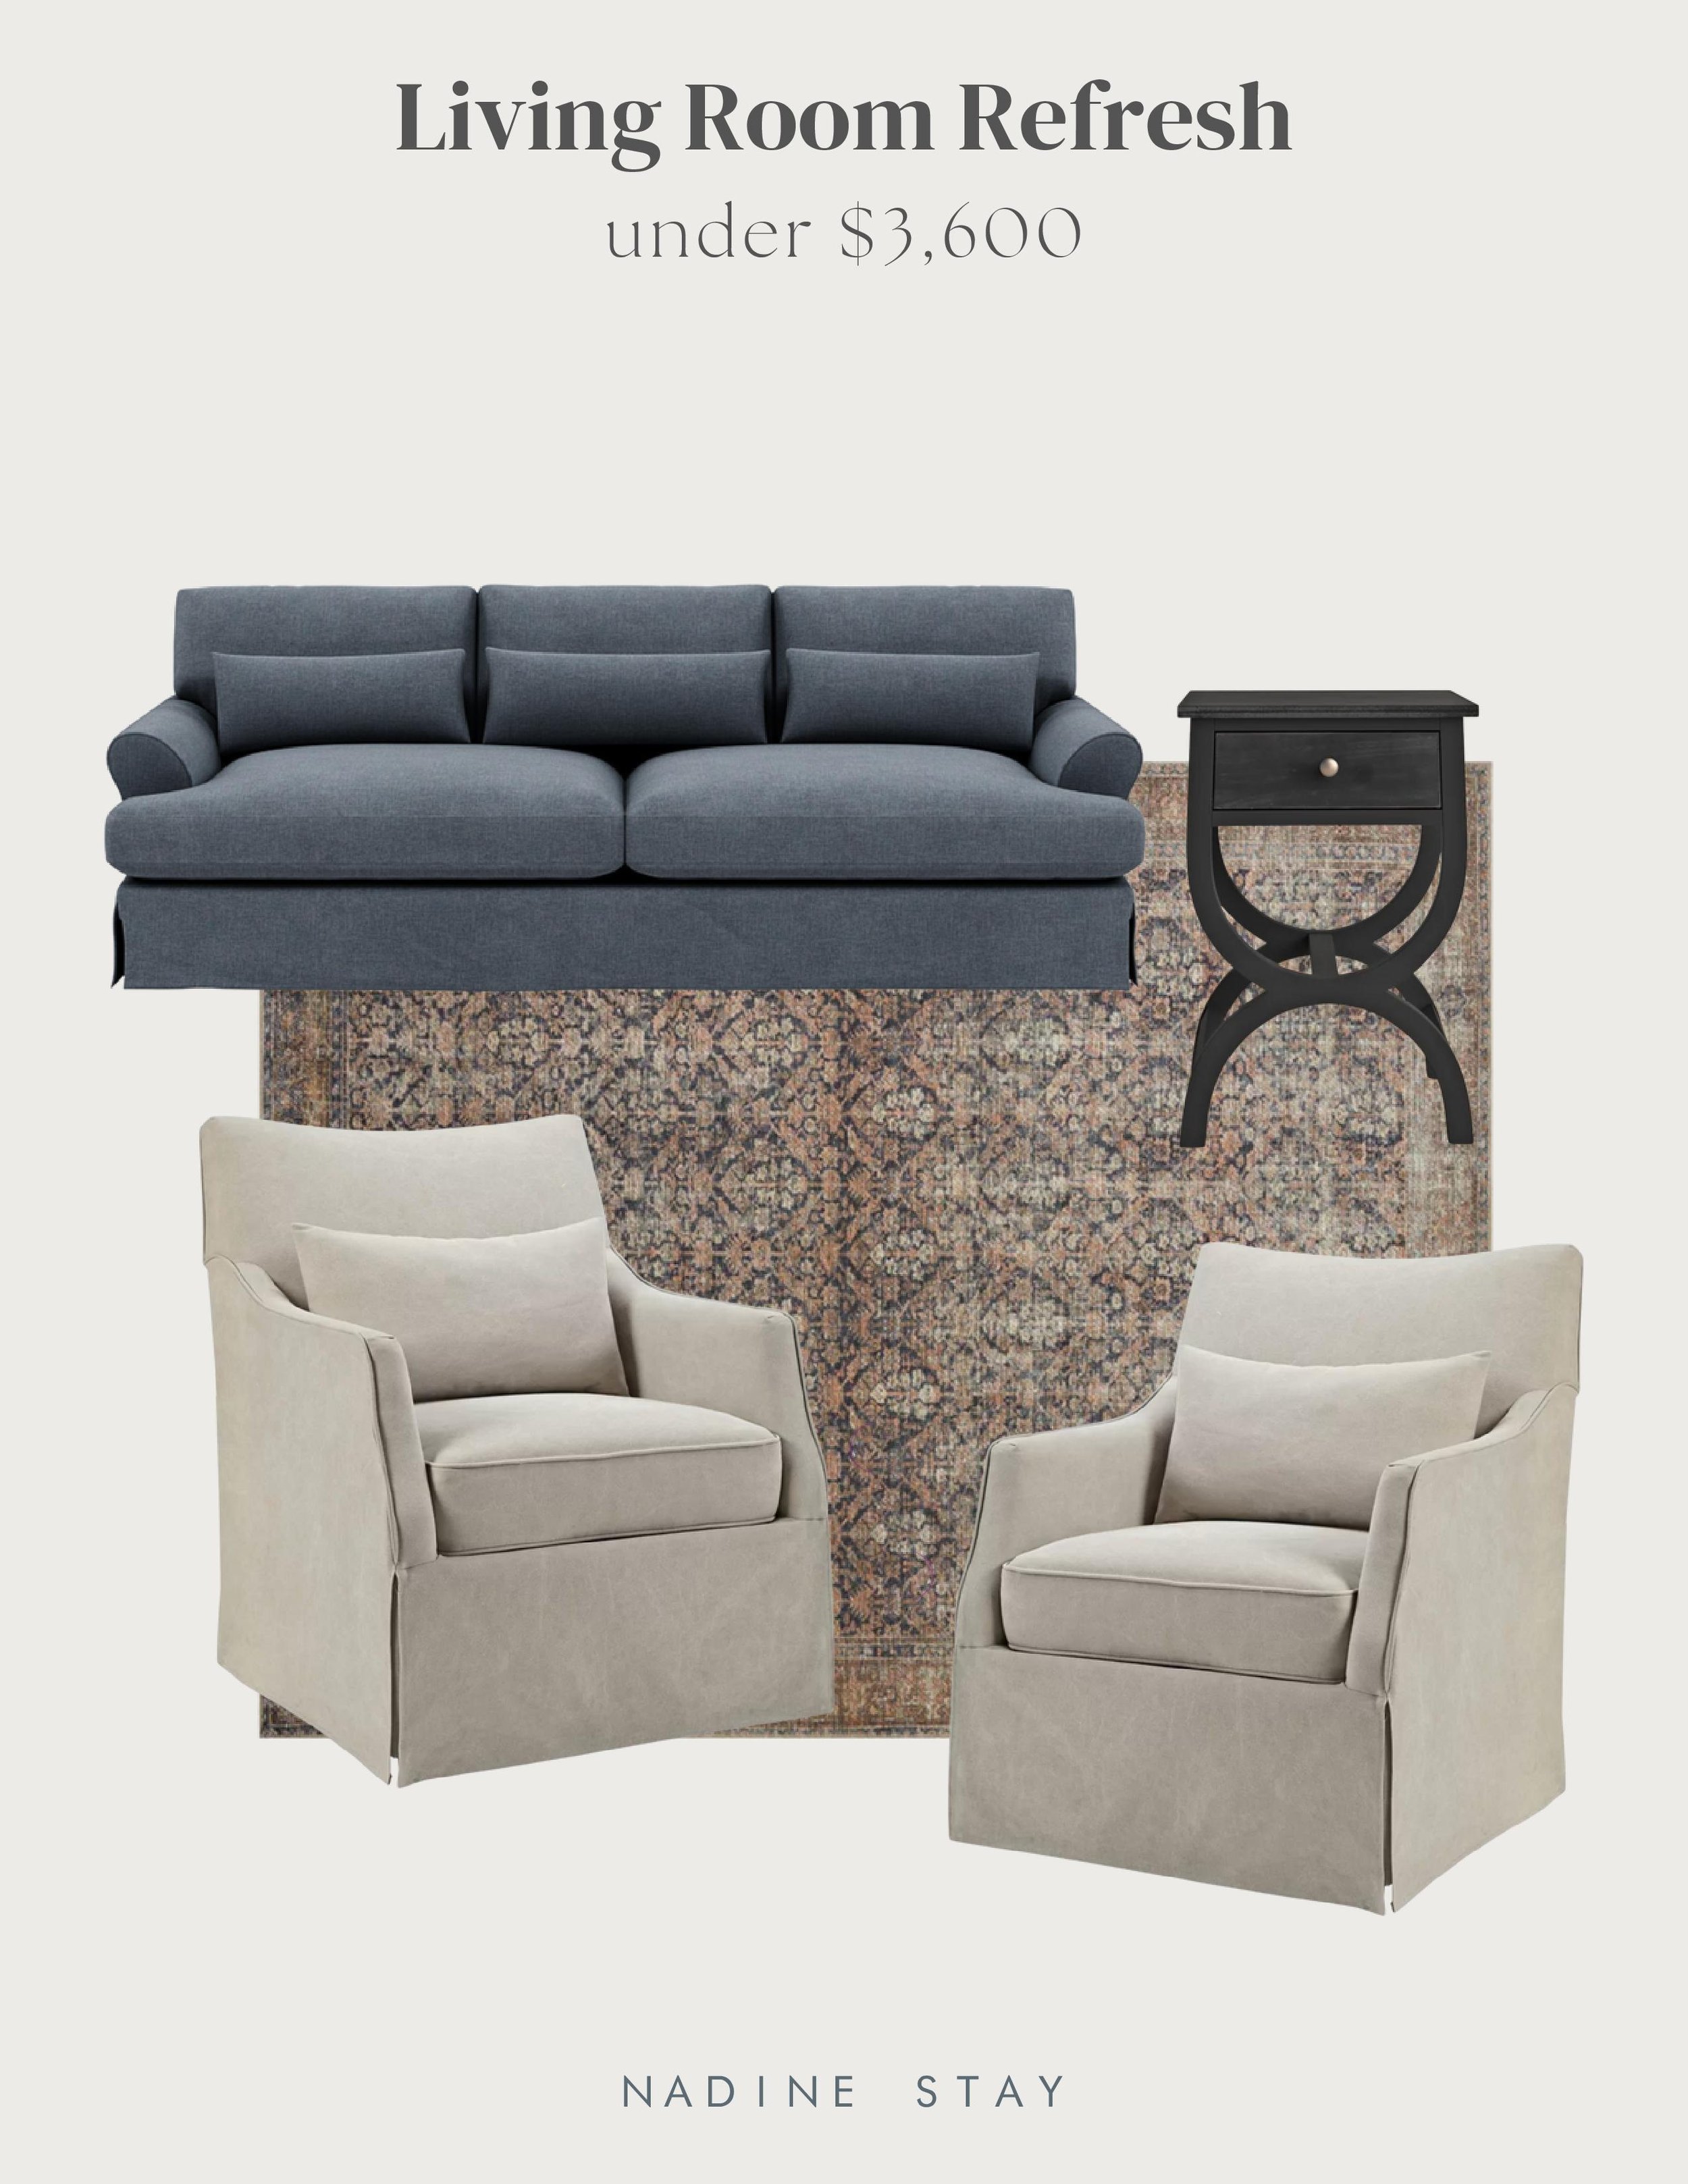 Living Room Refresh Under $5,000 by Nadine Stay | Living room makeover design plan. Blue sofa, dark wood round coffee table. Ivory slipcover armchairs. Billie rug by Amber Interiors x Loloi. California casual living room ideas. Free design plans.